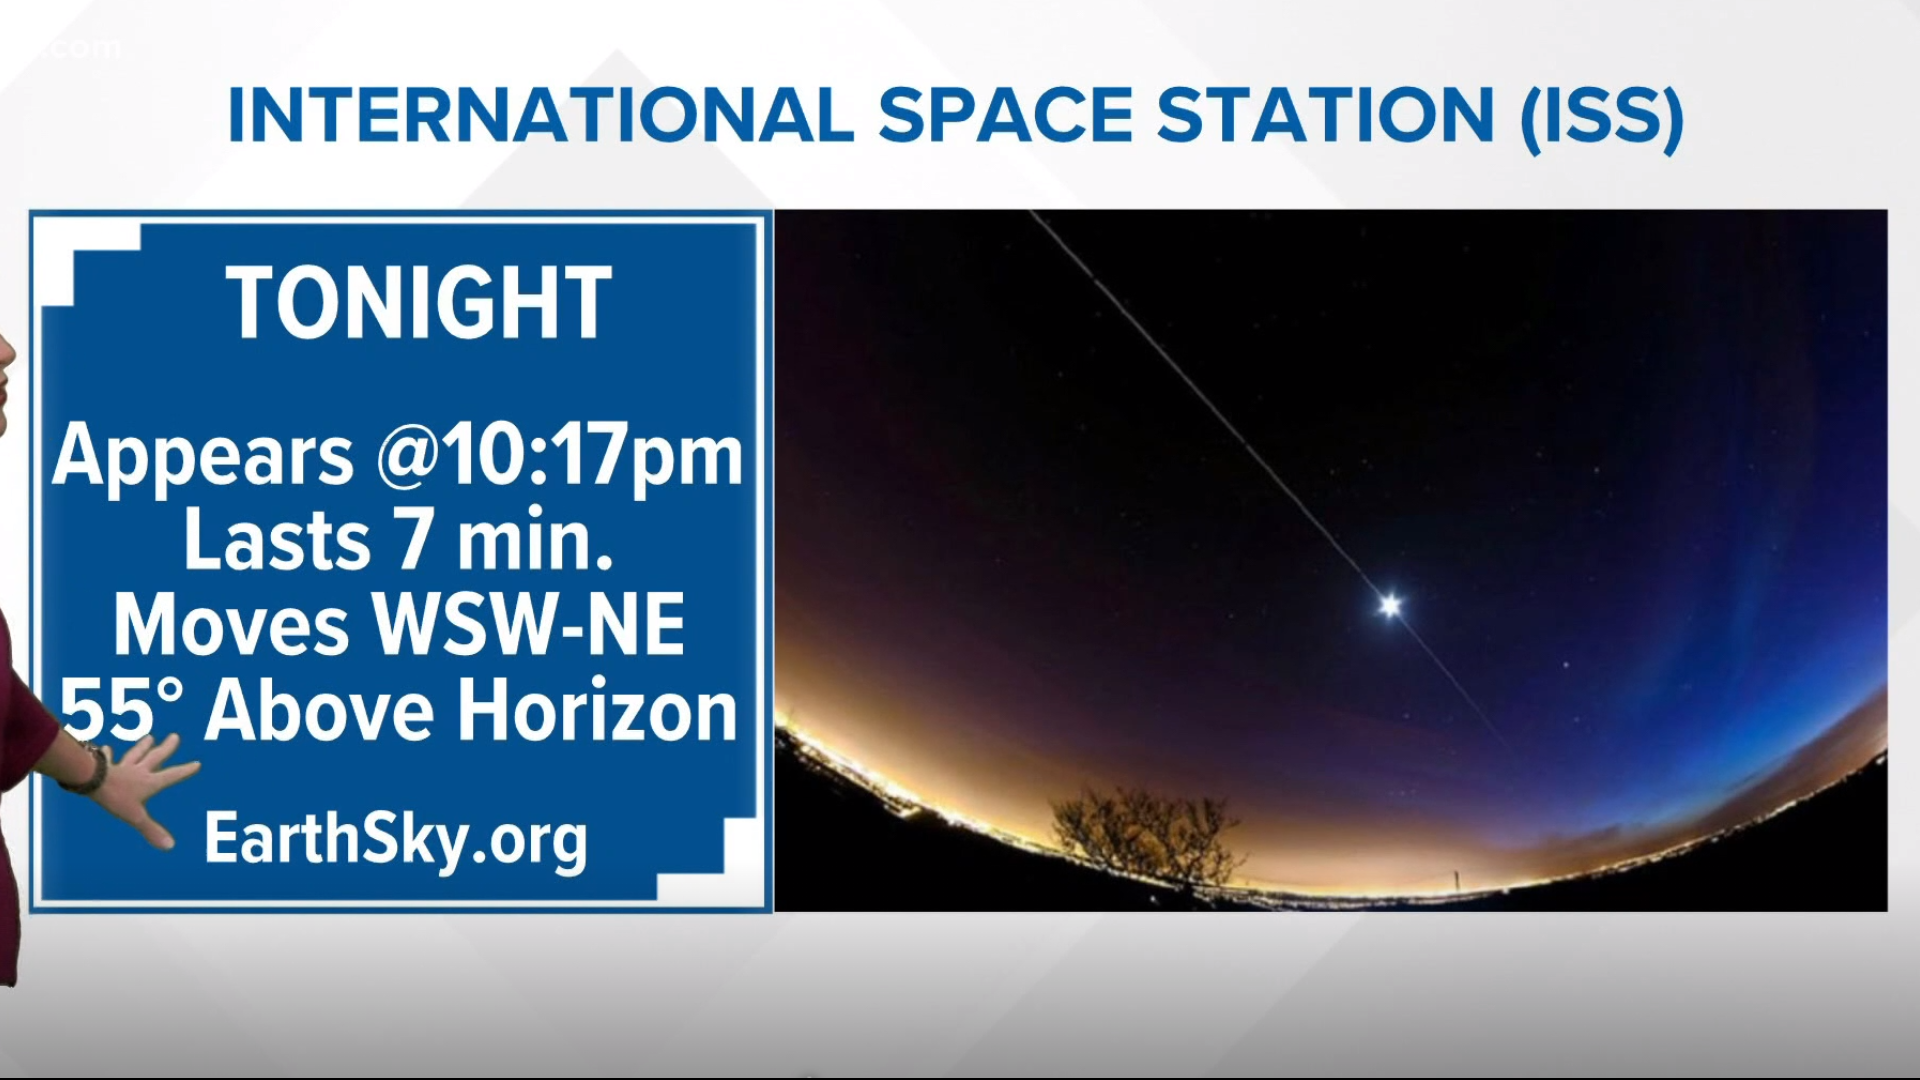 Cassie Nall breaks down how to spot the ISS in the sky!